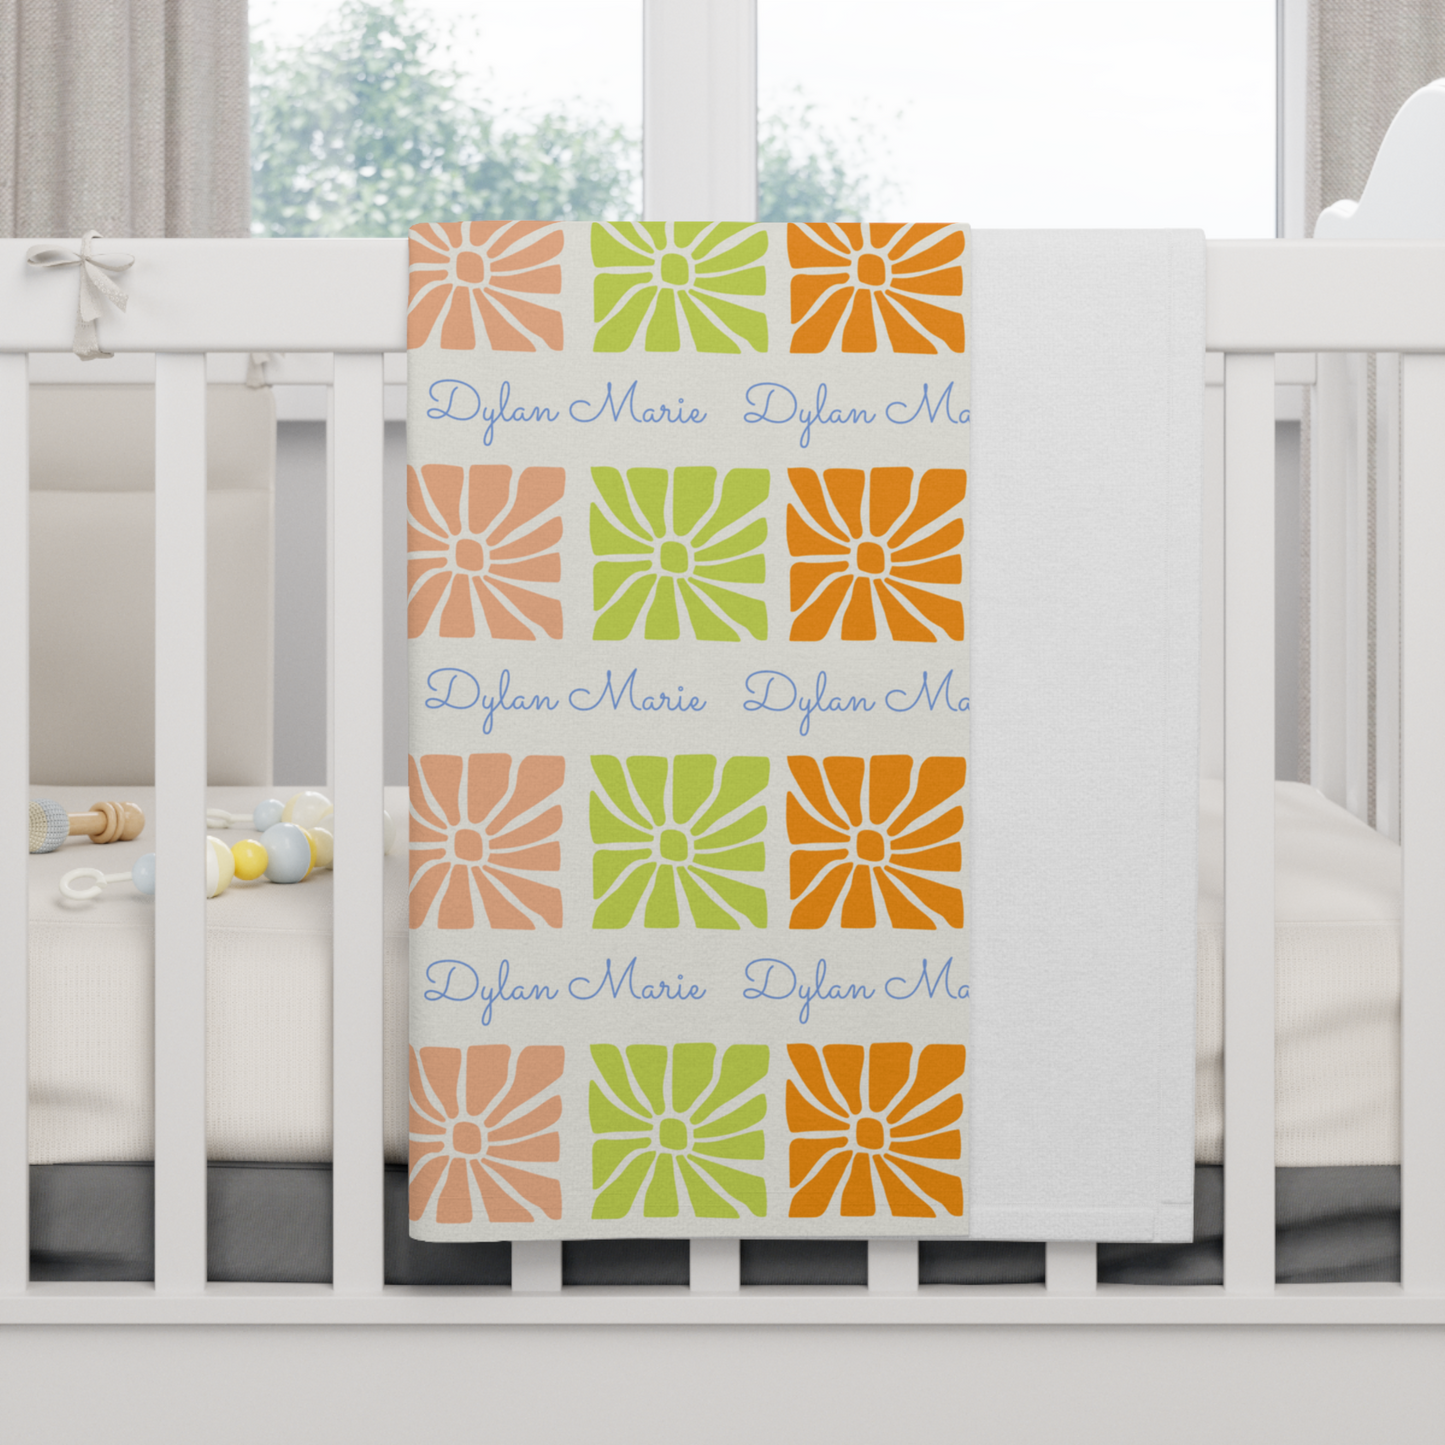 Fleece personalized baby blanket in a multi-colored boho flower pattern hung over side of white crib with window in the background